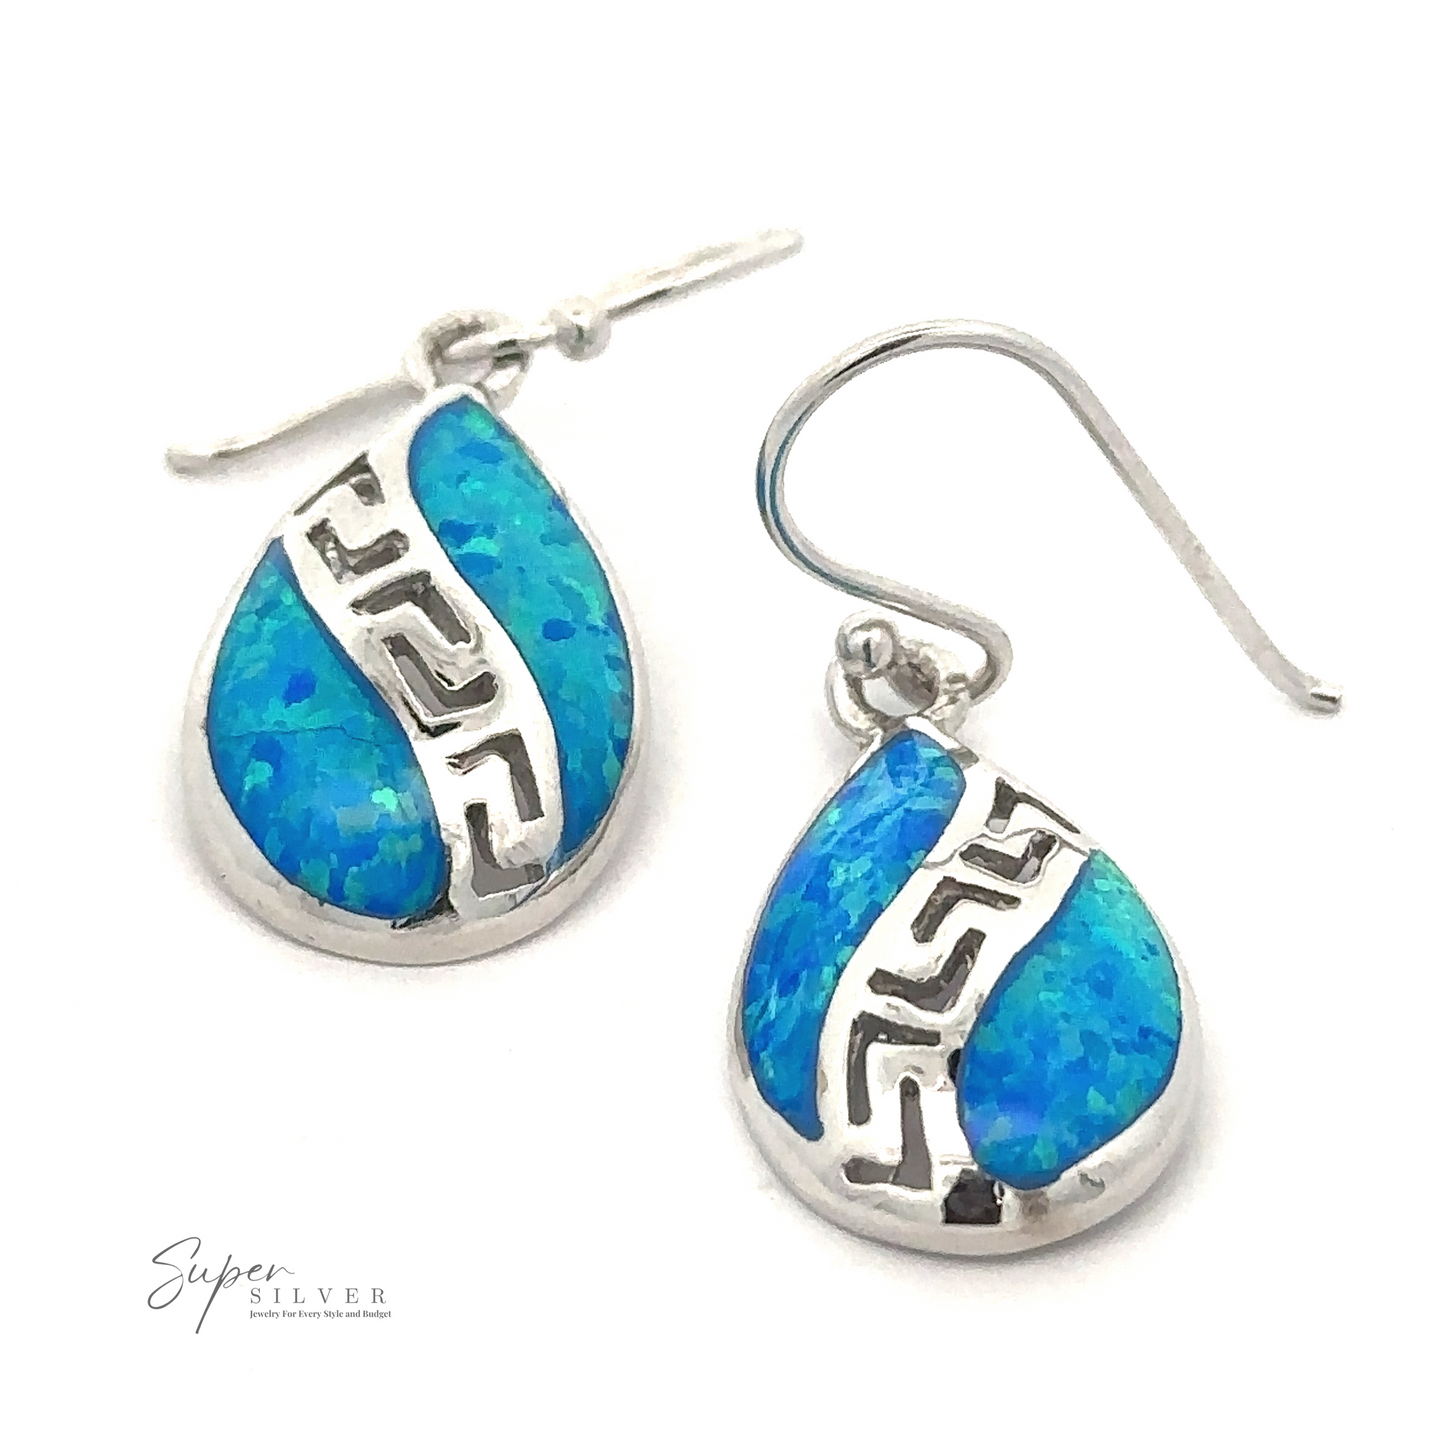 Teardrop-shaped earrings with blue stone inlays and intricate Greek spiral designs. Crafted from Rhodium Plated .925 Sterling Silver, the hooks are attached for wearing. The image features the "Lab-Opal Teardrop Earrings With Swirl Designs" brand logo at the bottom left corner.